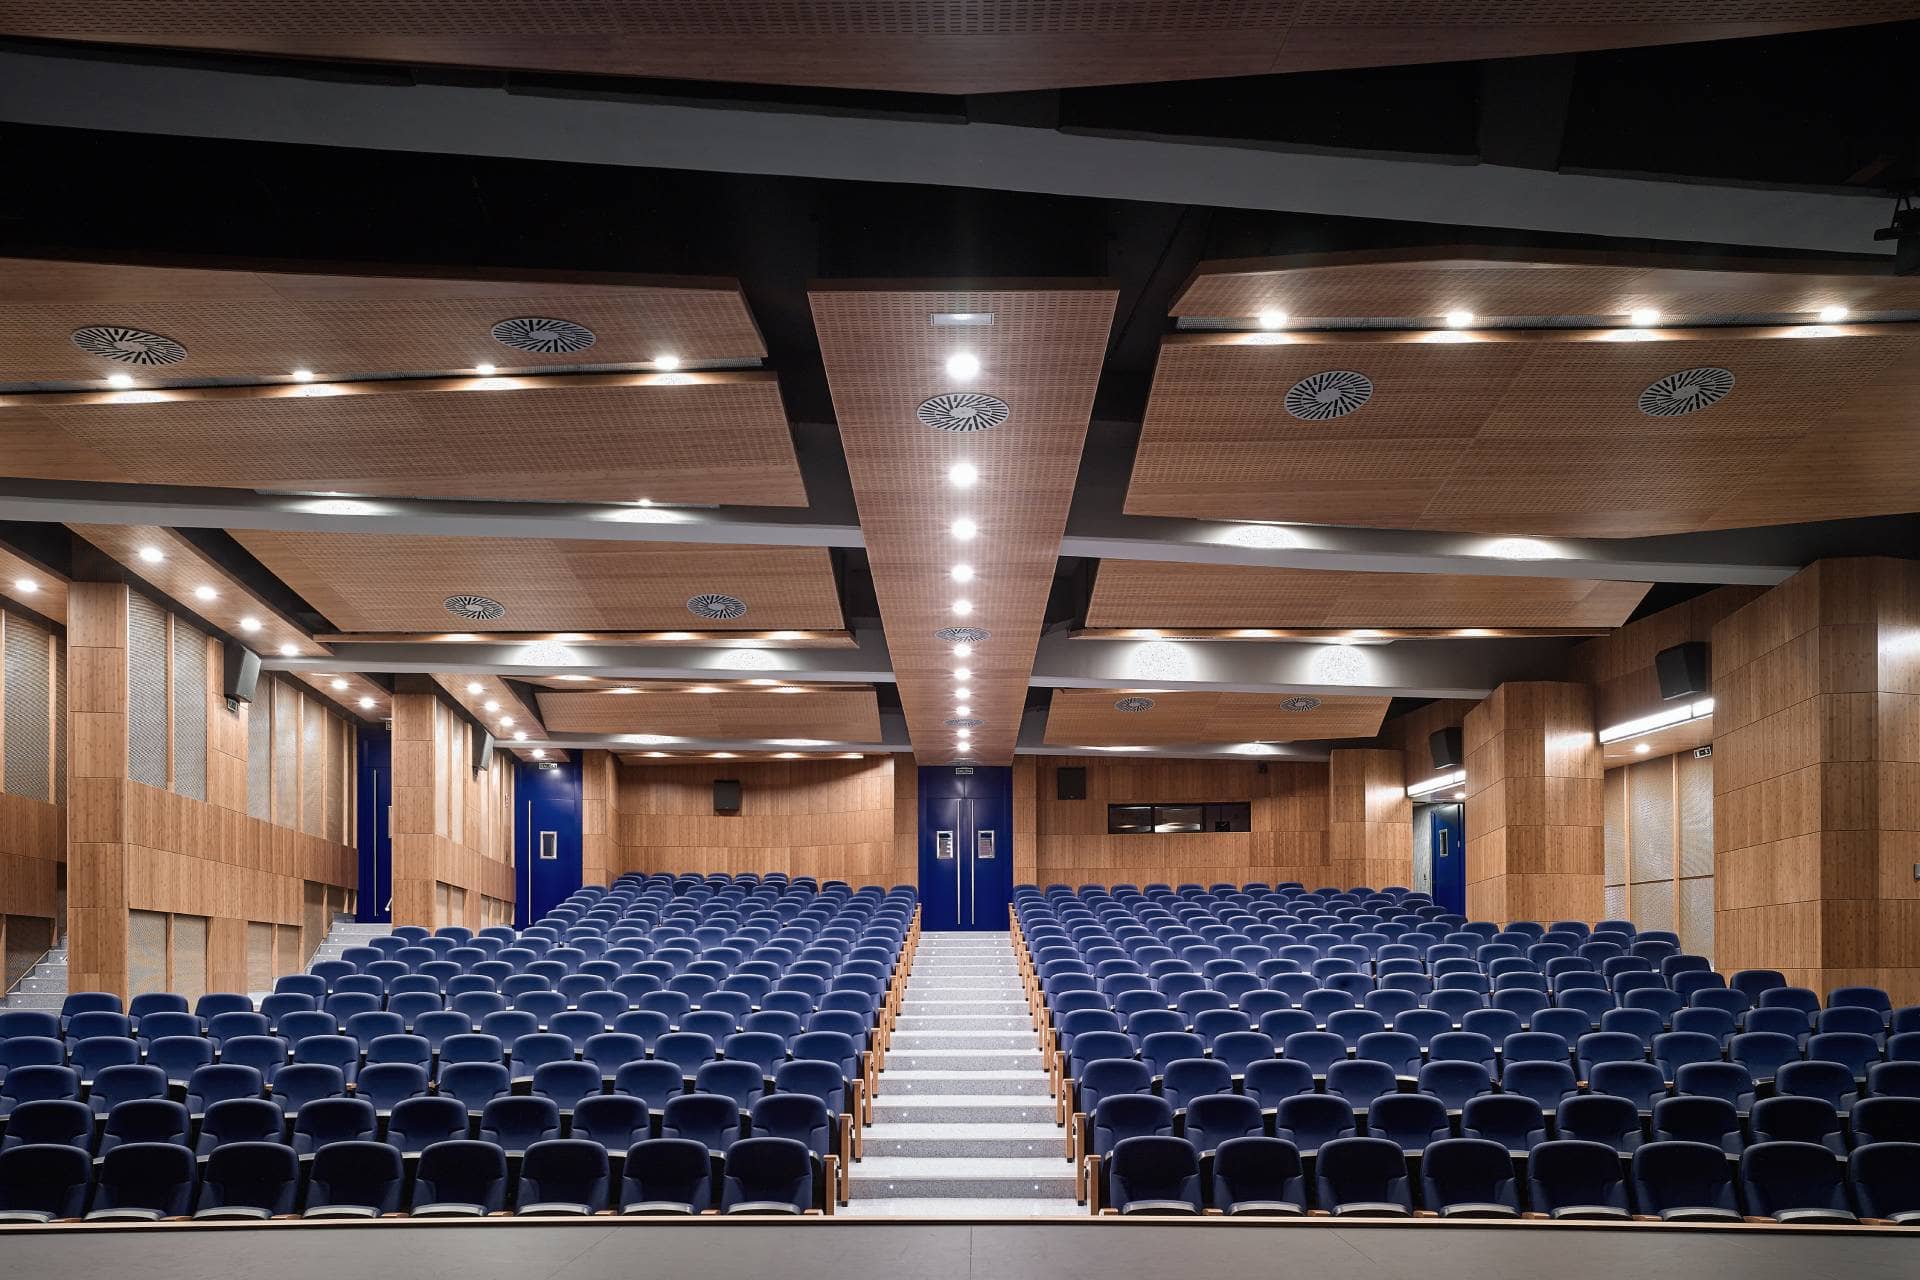 Acoustic solutions. Ceiling of the Conference Hall